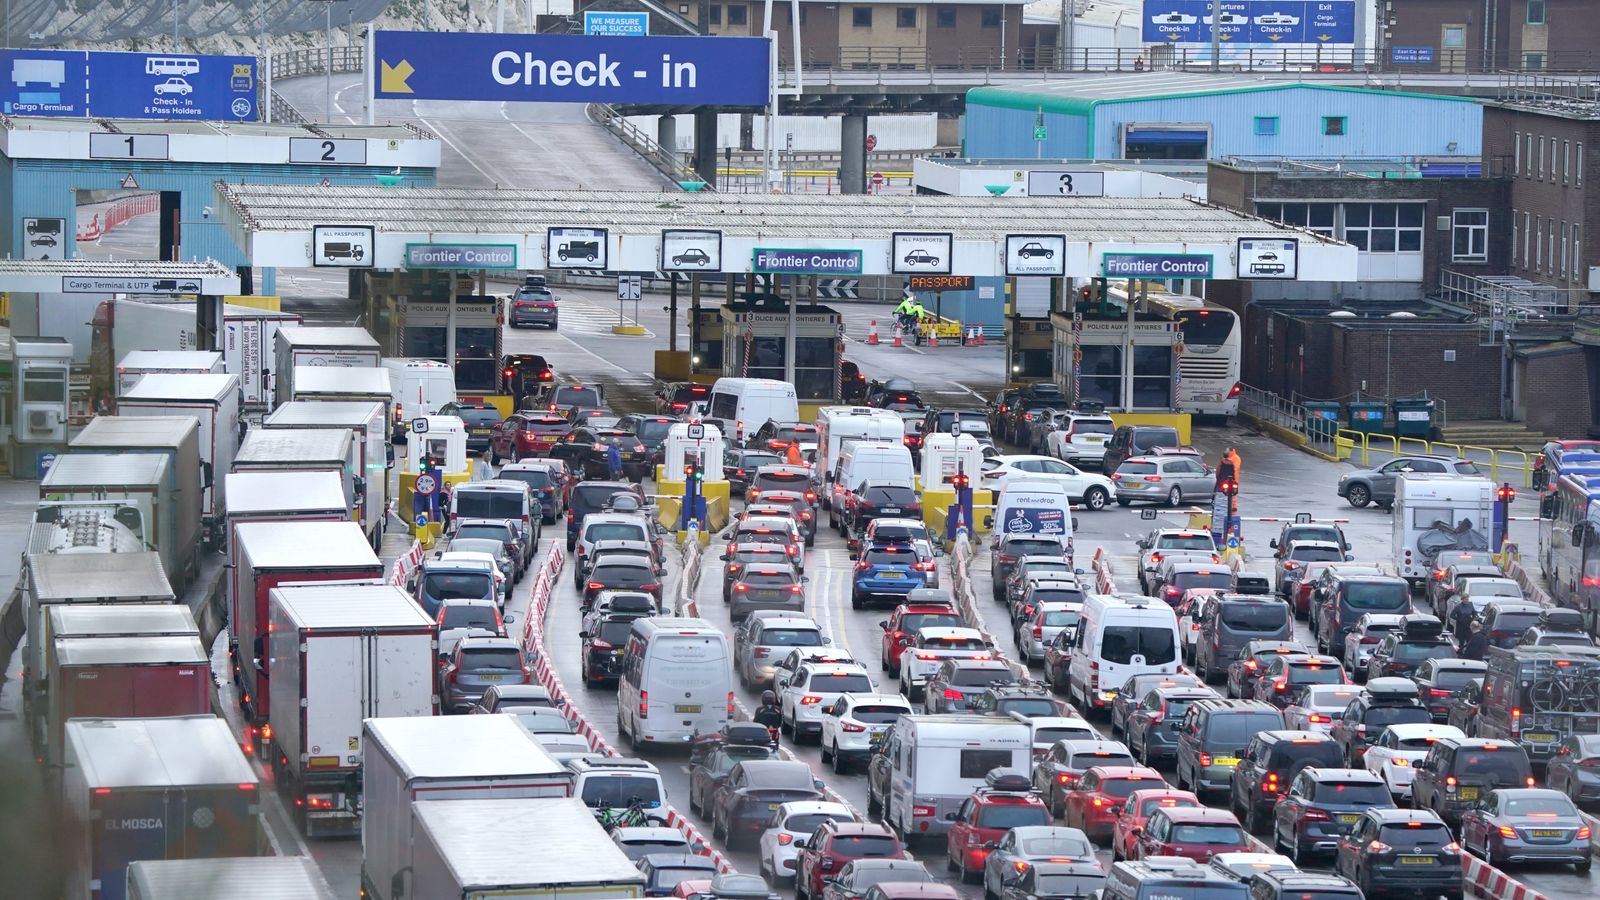 Port of Dover delays: 'Not fair' to blame Brexit, says Braverman as passengers stranded for up to 14 hours